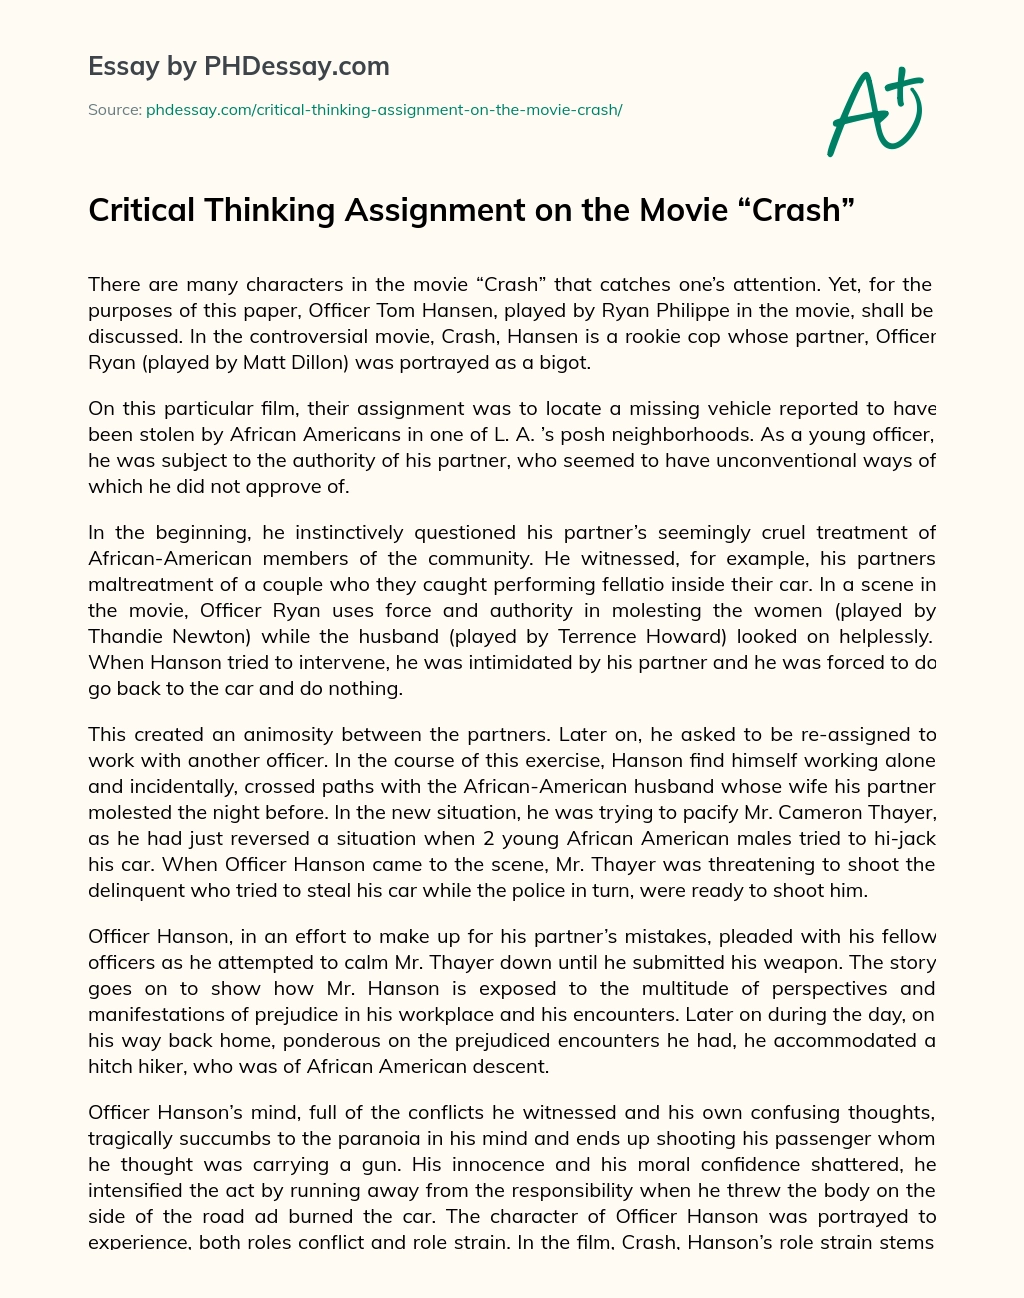 Critical Thinking Assignment on the Movie “Crash” essay